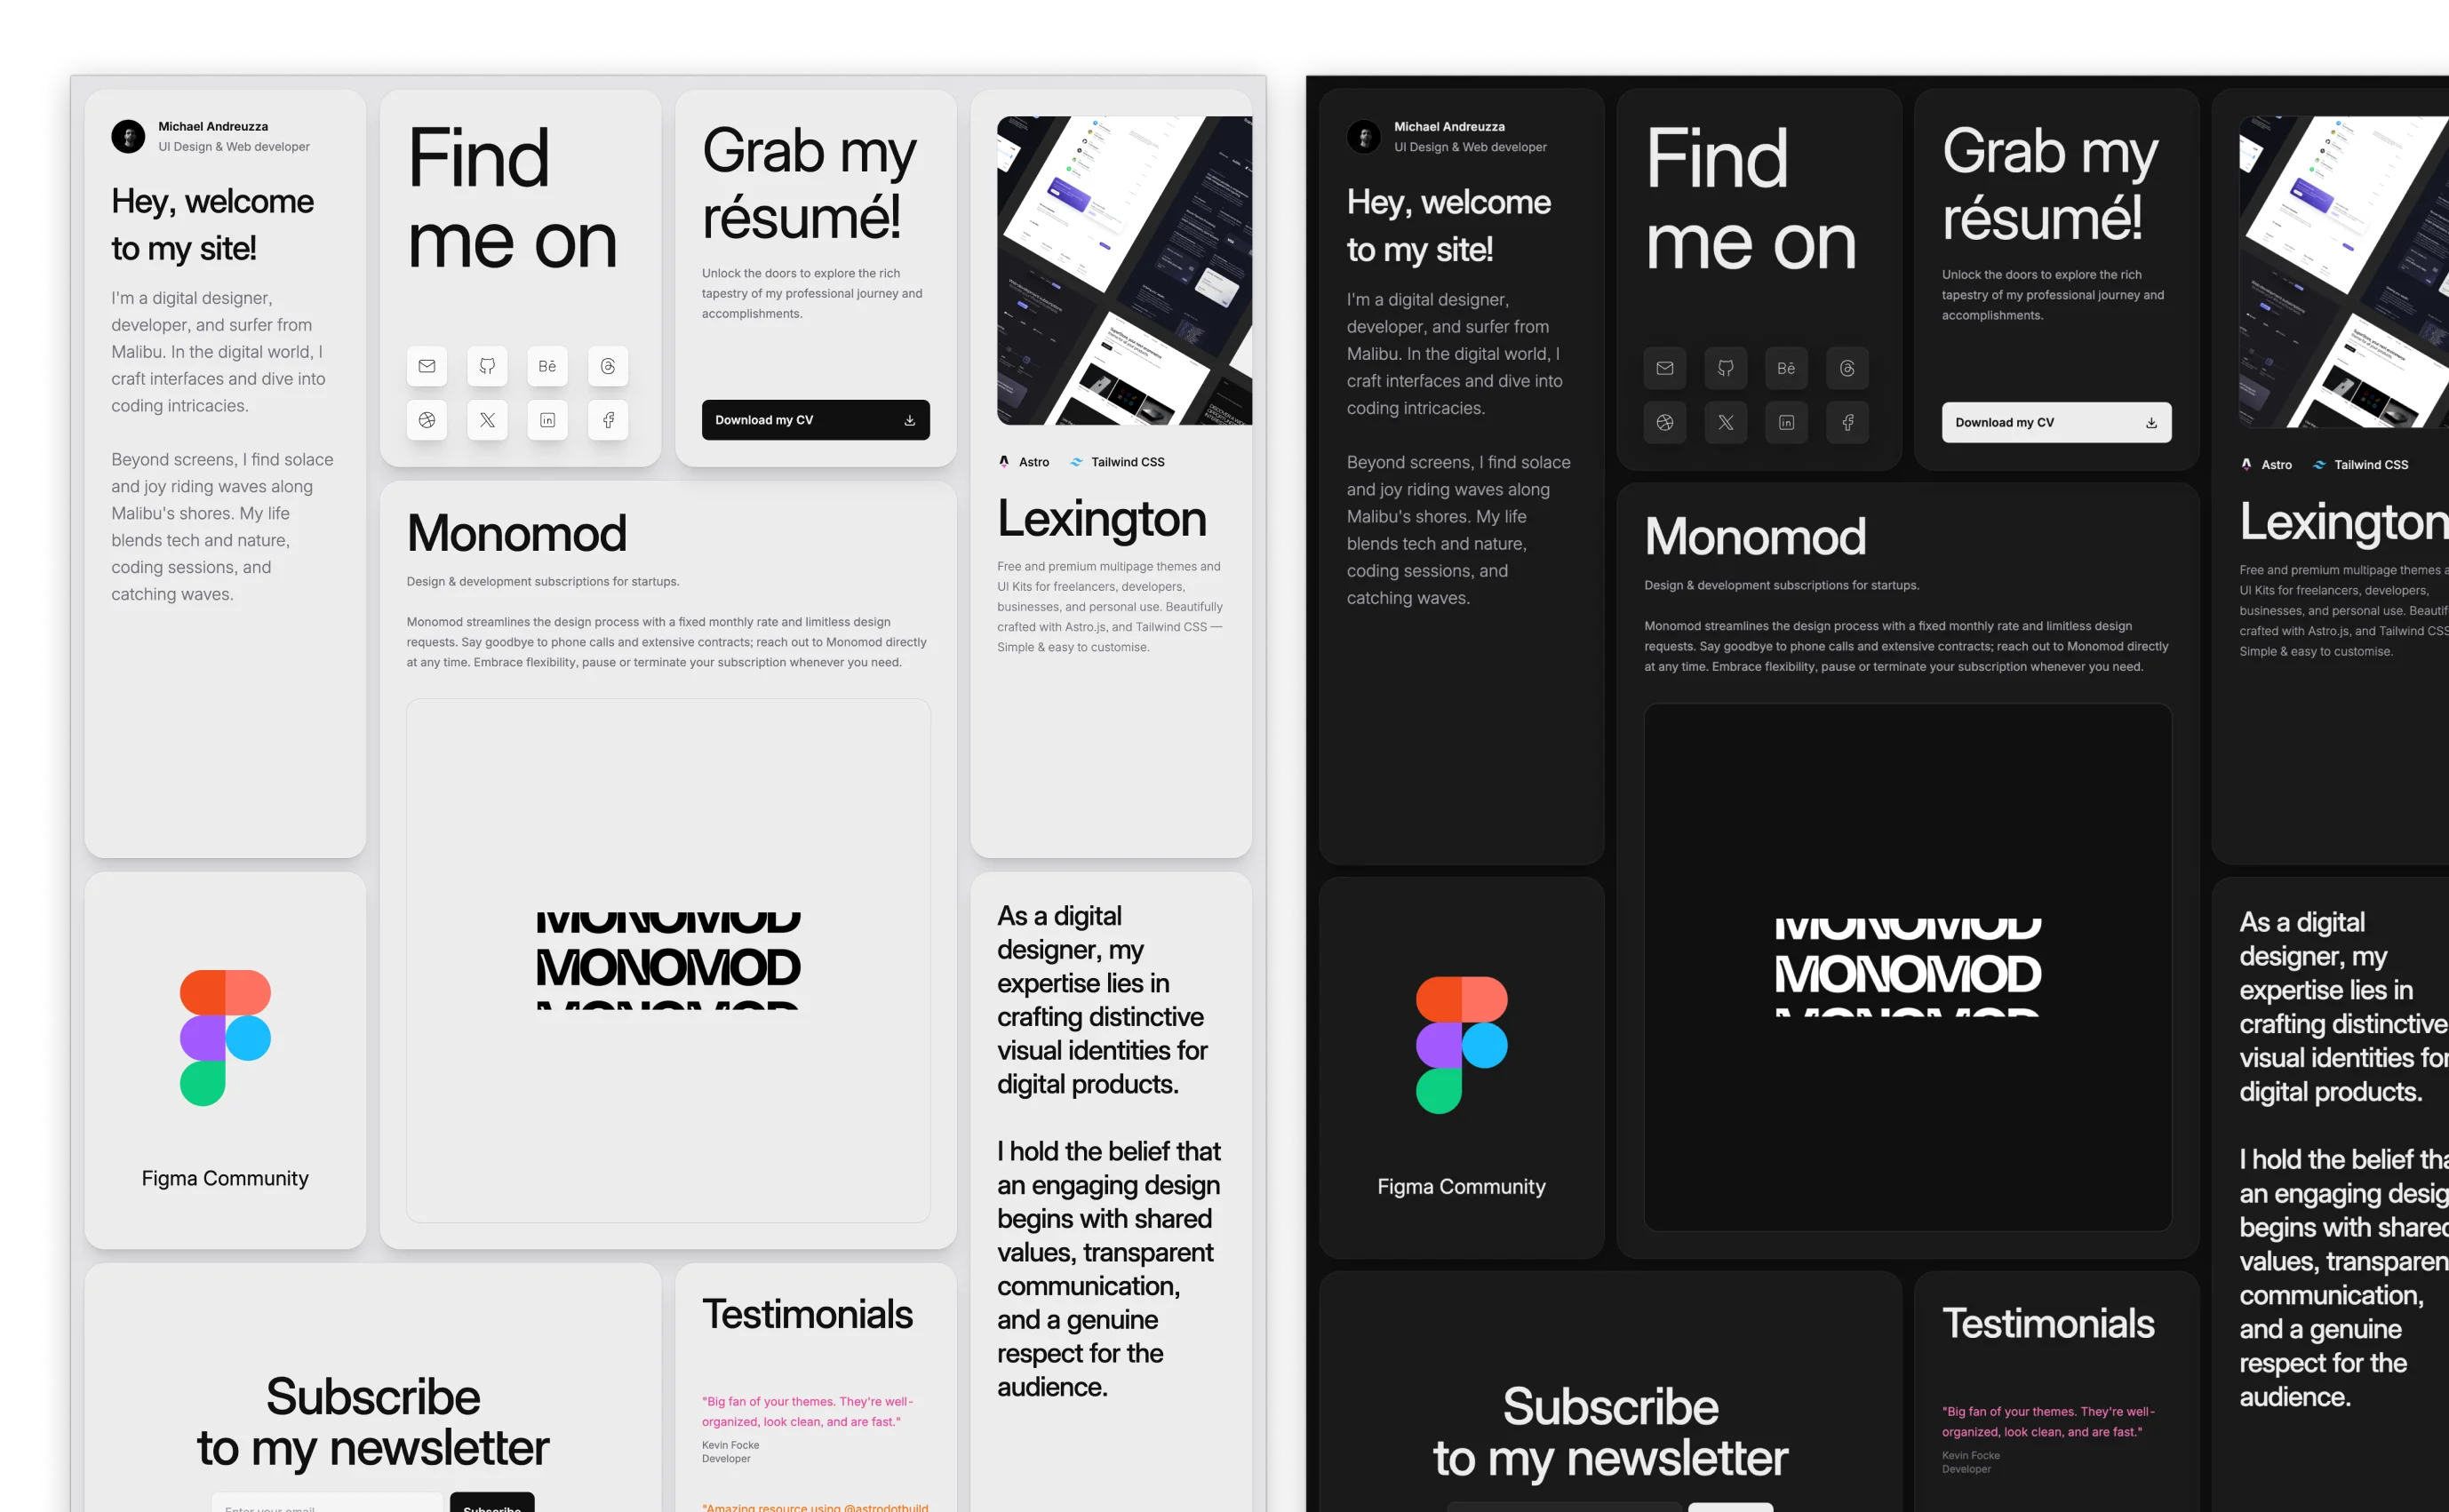 Prima Persona theme with a monochrome palette, showcasing a designer's personal website sections like 'Hey, welcome to my site,' 'Find me on' with social icons, 'Grab my résumé,' and an invitation to join the Figma community. Features include testimonials, newsletter subscription, and highlighted design services.